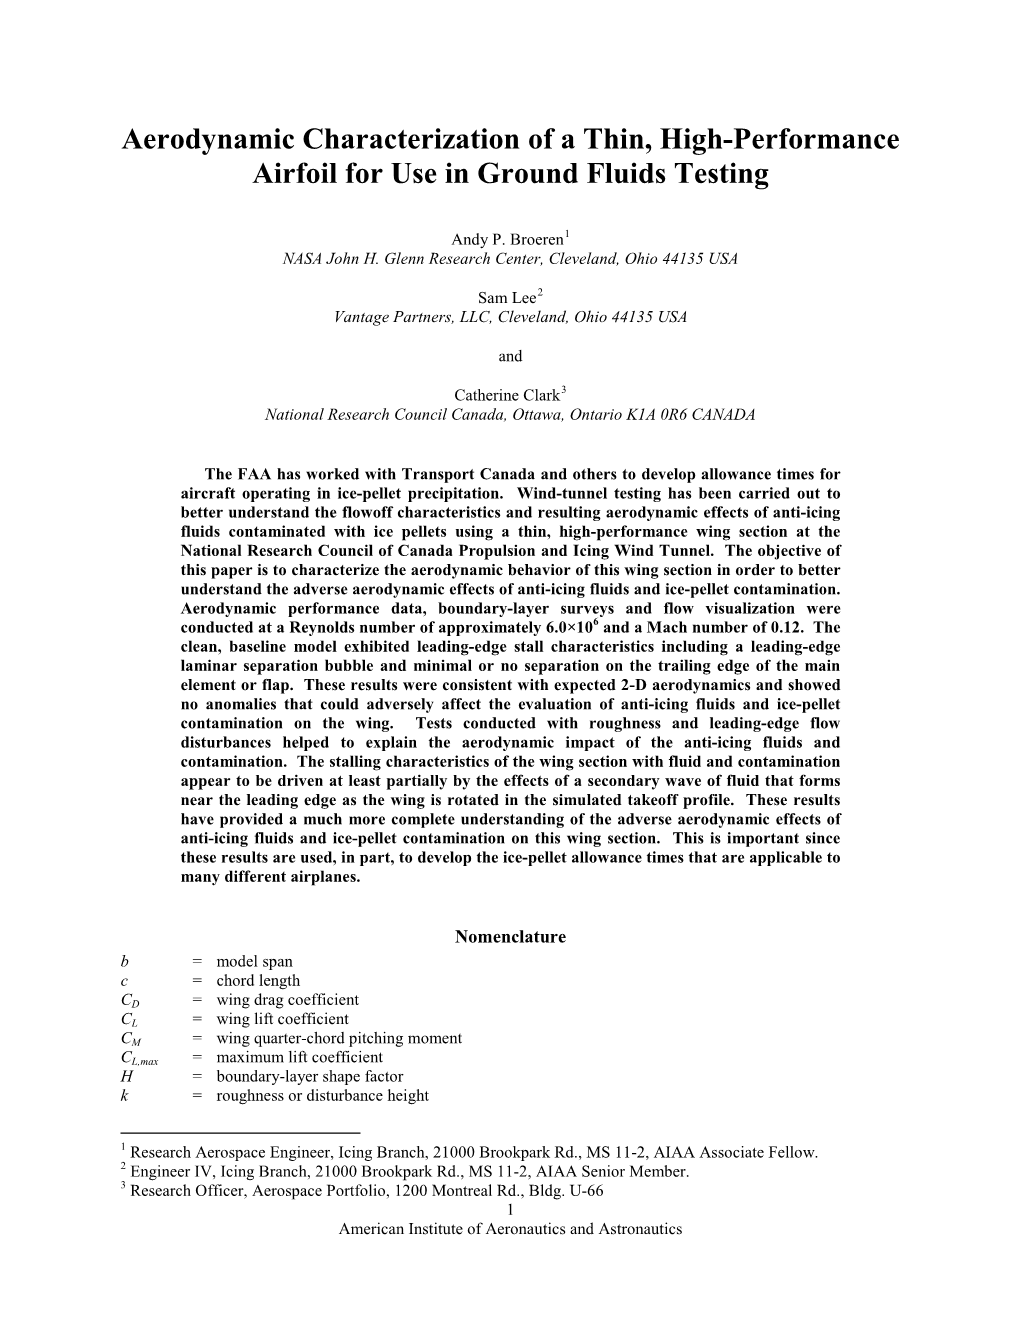 Aerodynamic Characterization of a Thin, High-Performance Airfoil for Use in Ground Fluids Testing